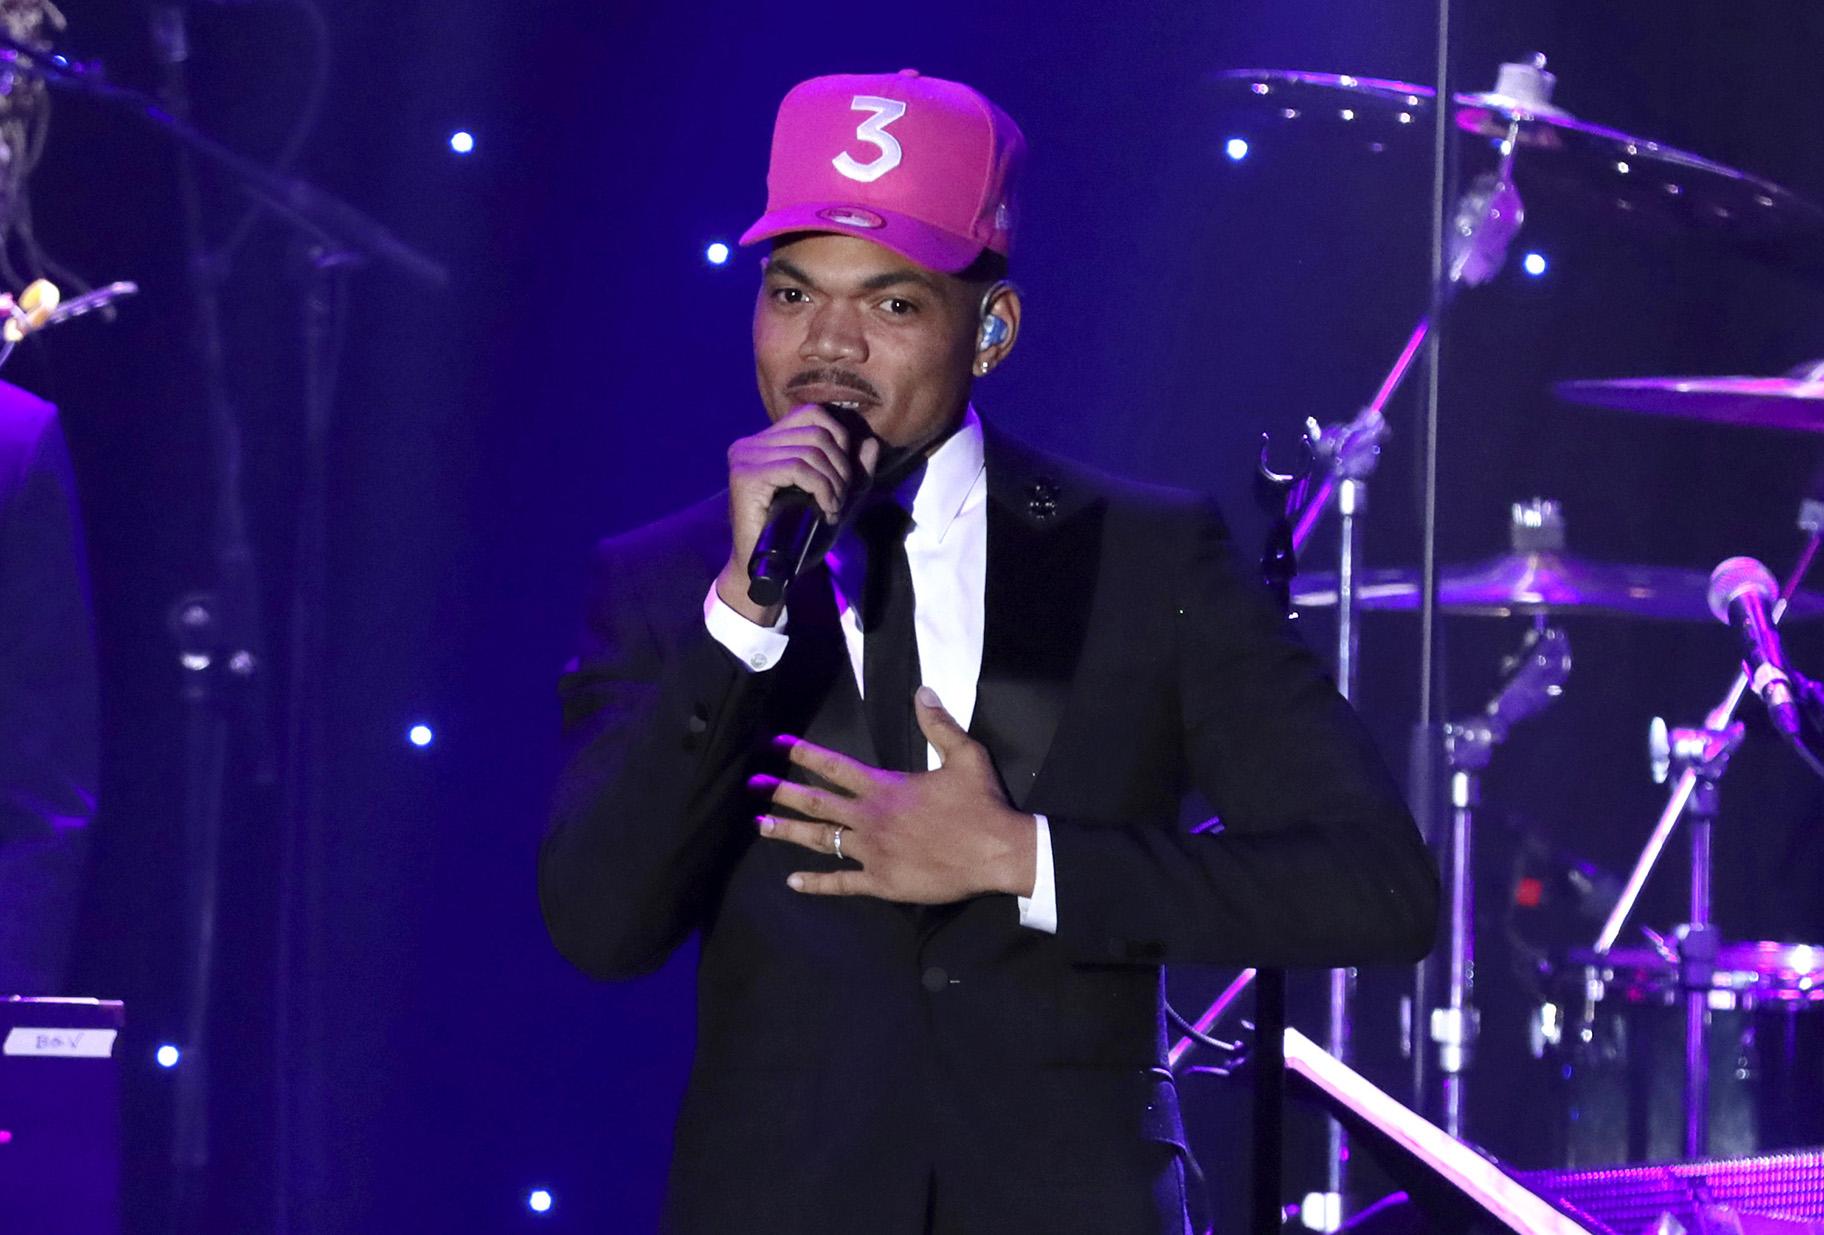 Chance the Rapper performs on stage at the Pre-Grammy Gala And Salute To Industry Icons on Jan. 25, 2020, in Beverly Hills, Calif. (Photo by Willy Sanjuan / Invision / AP, File)